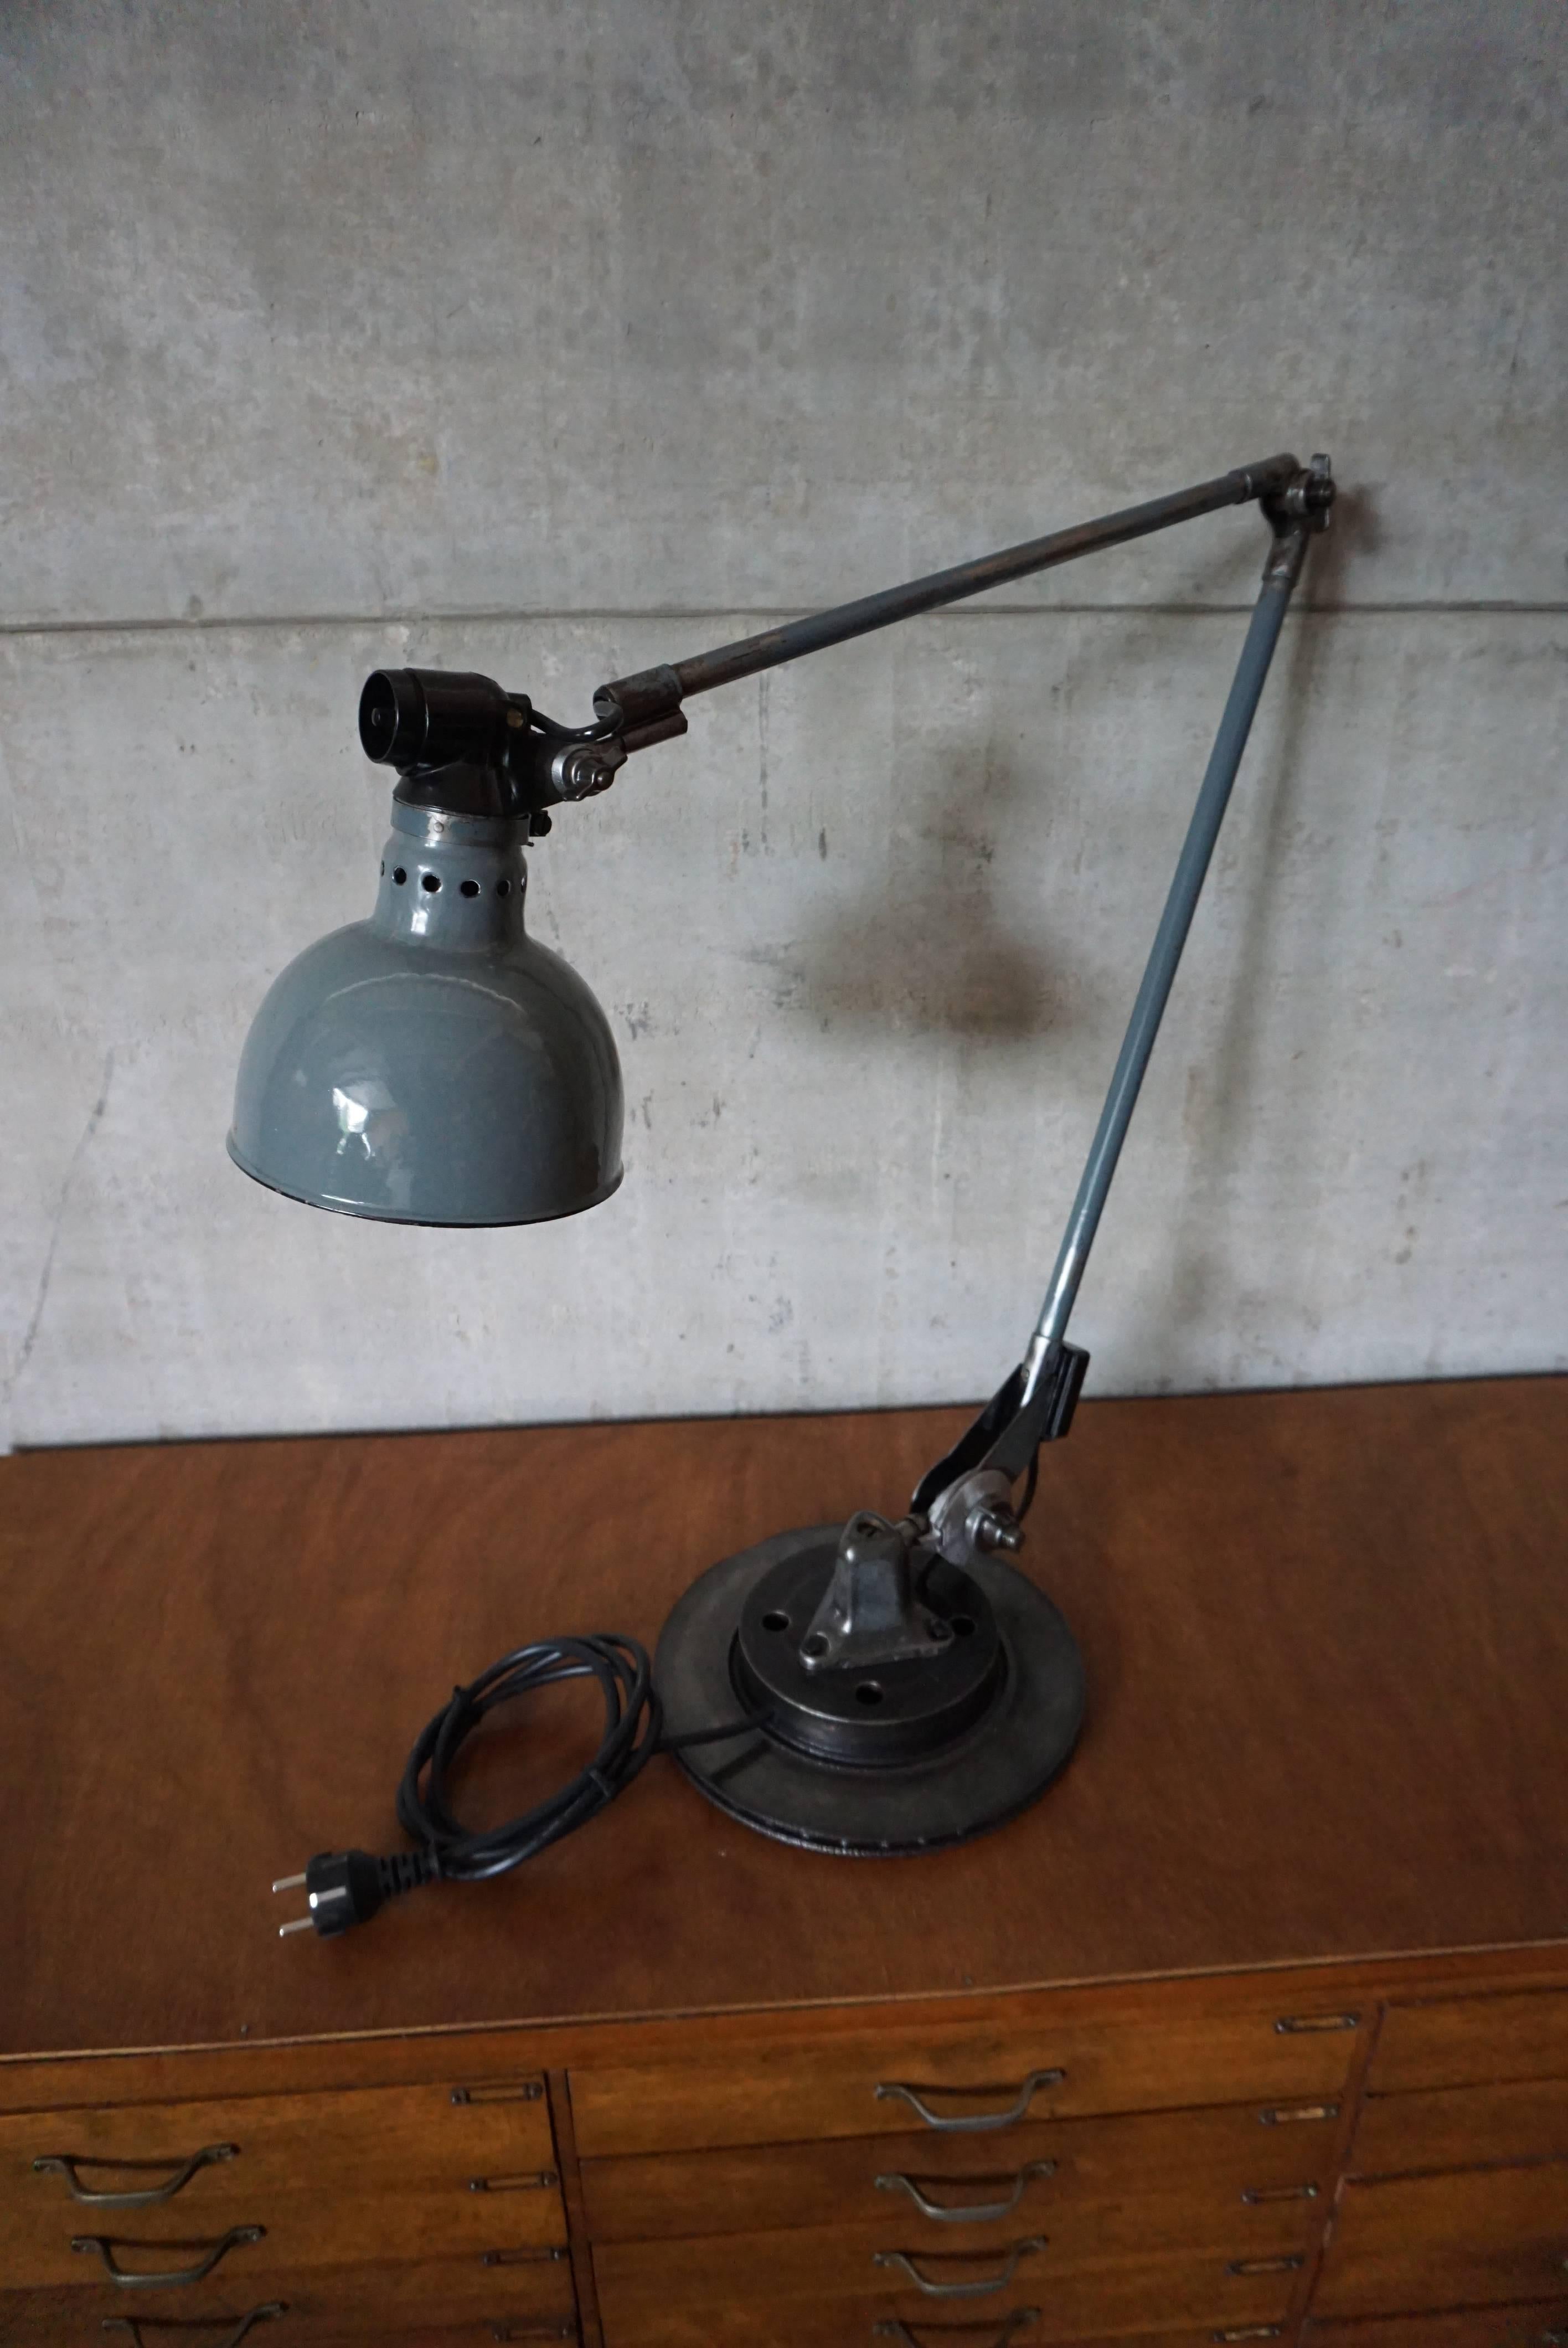 This Industrial desk lamp was designed by Ernst Rademacher in the early 20th century and manufactured by Rademacher in the 1930s. It features a large, blue enamel lampshade mounted on a brake disk which is later added for stability. It is marked